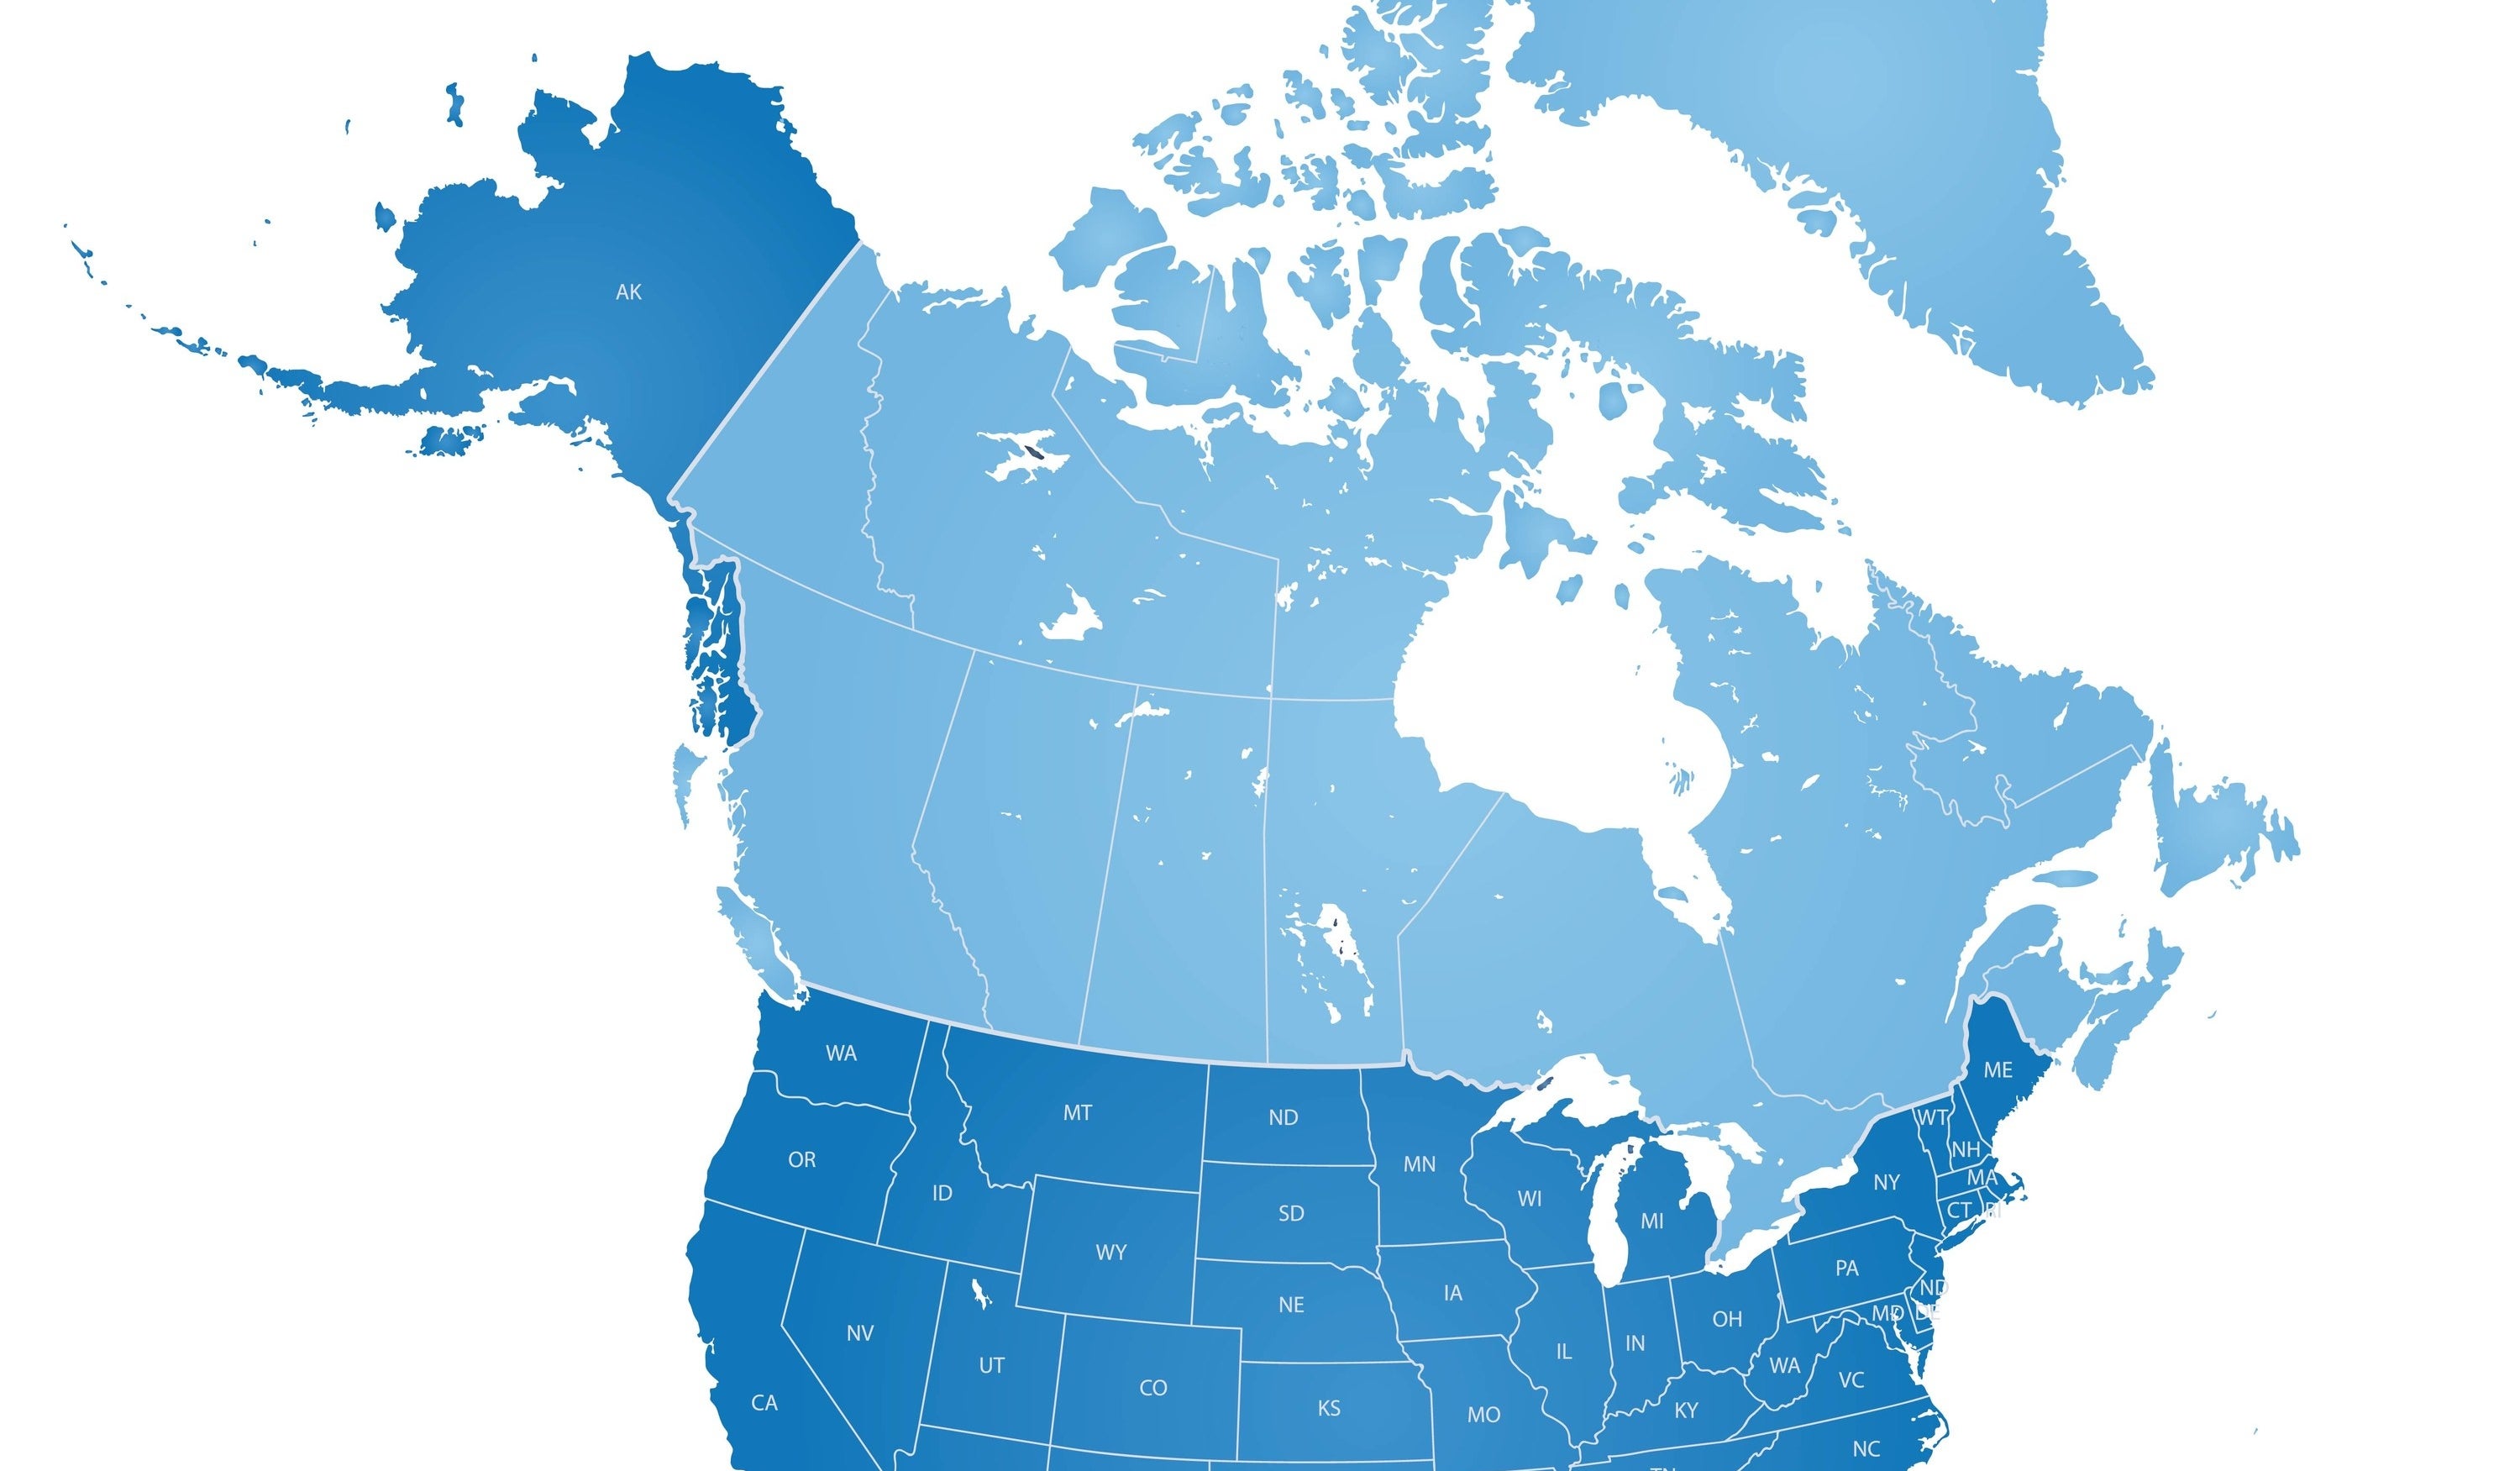 A map showing the United States-Canadian border